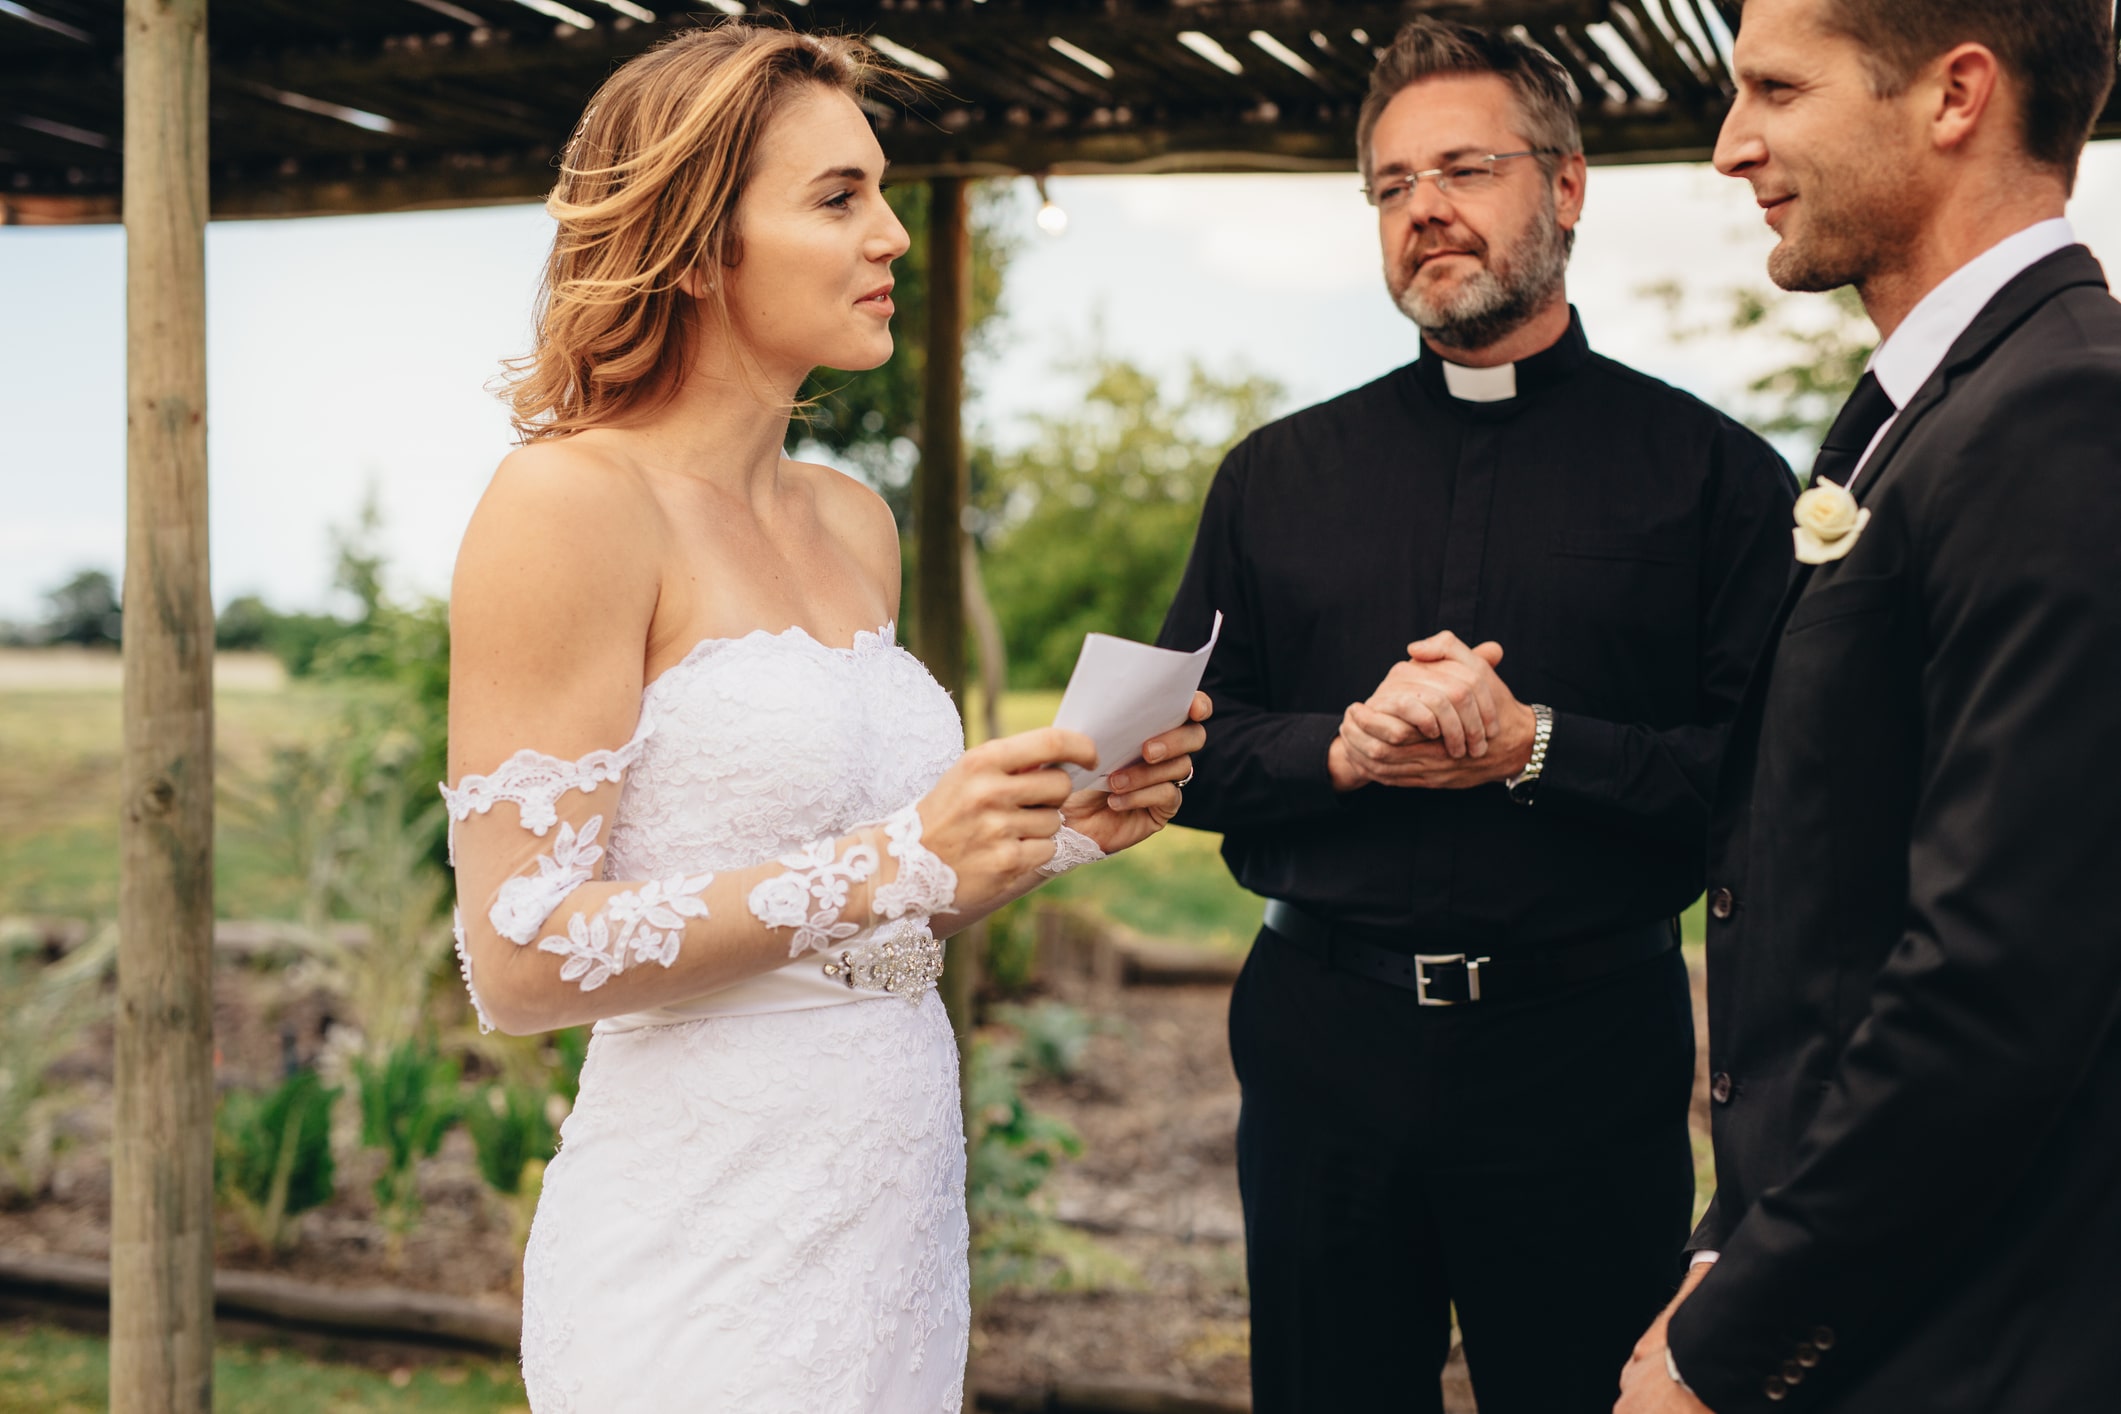 While the traditional wedding readings hold a special place in the hearts of many, some couples are choosing to take a more modern approach, seeking readings that resonate with their unique personalities and experiences.